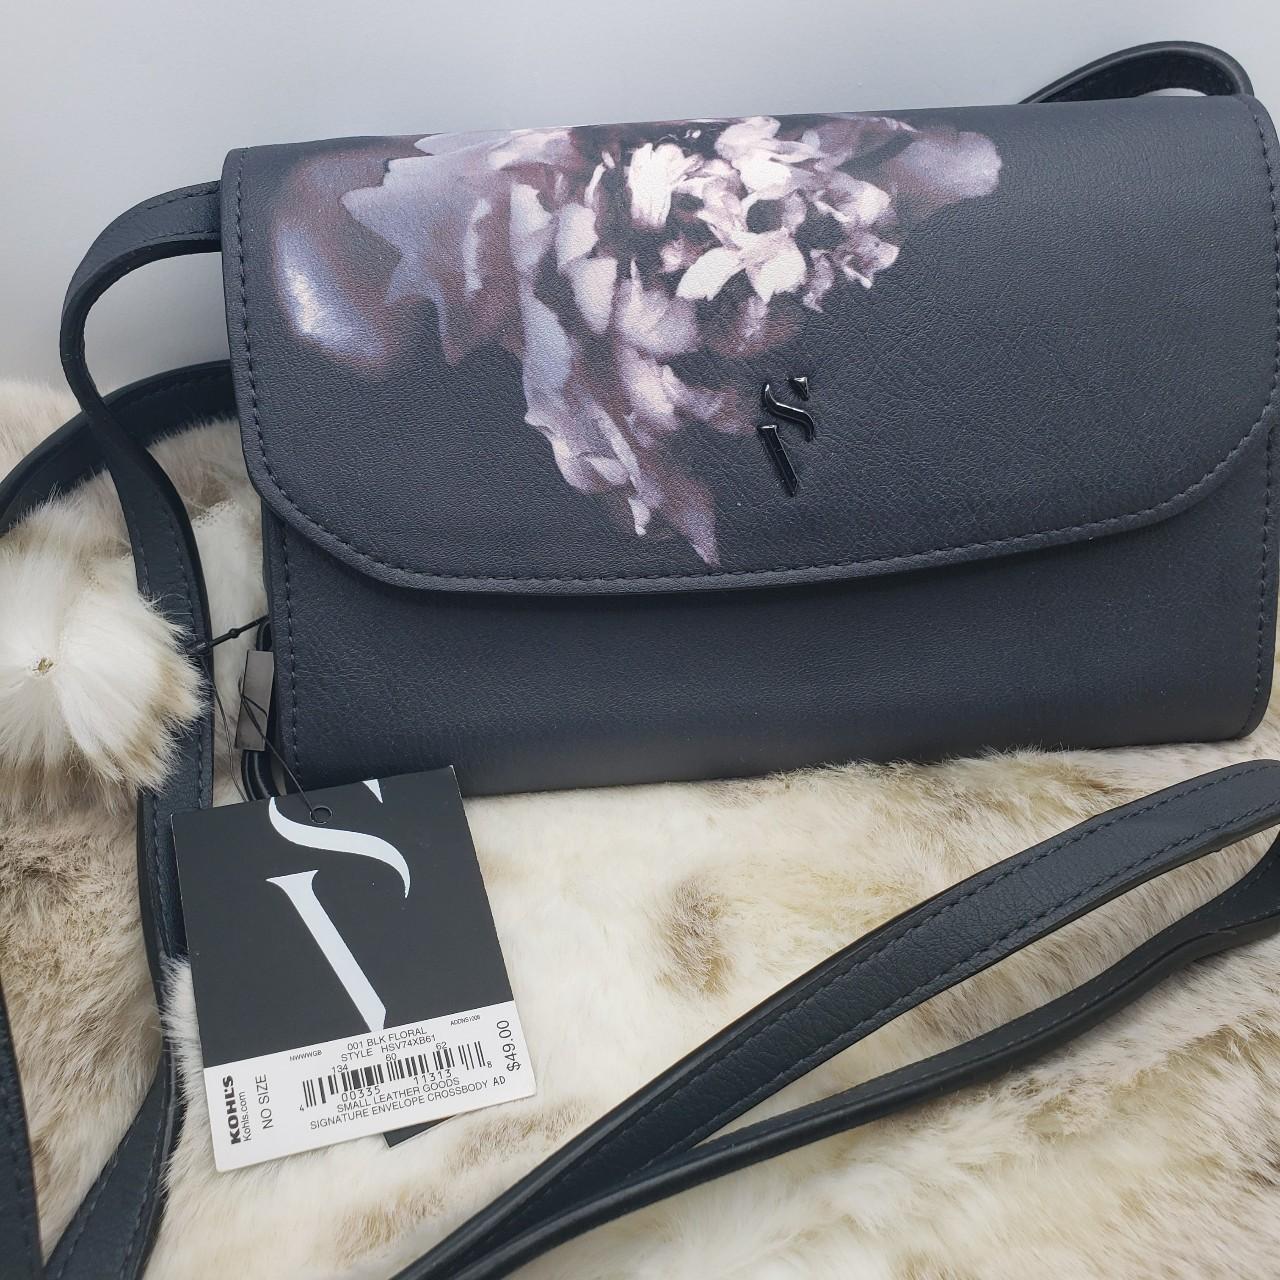 Best Sienna Ricchi Purse From Kohls for sale in Marion, Ohio for 2024